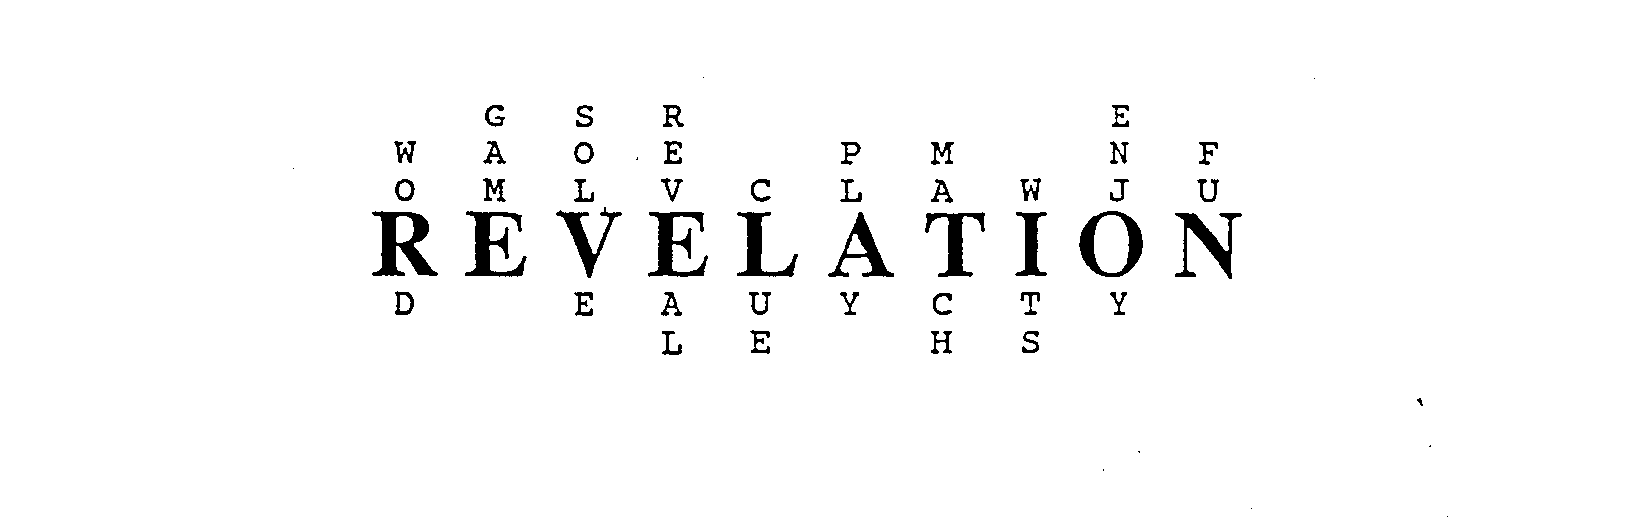 Trademark Logo REVELATION WORD GAME SOLVE REVEAL CLUE PLAY MATCH WITS ENJOY FUN